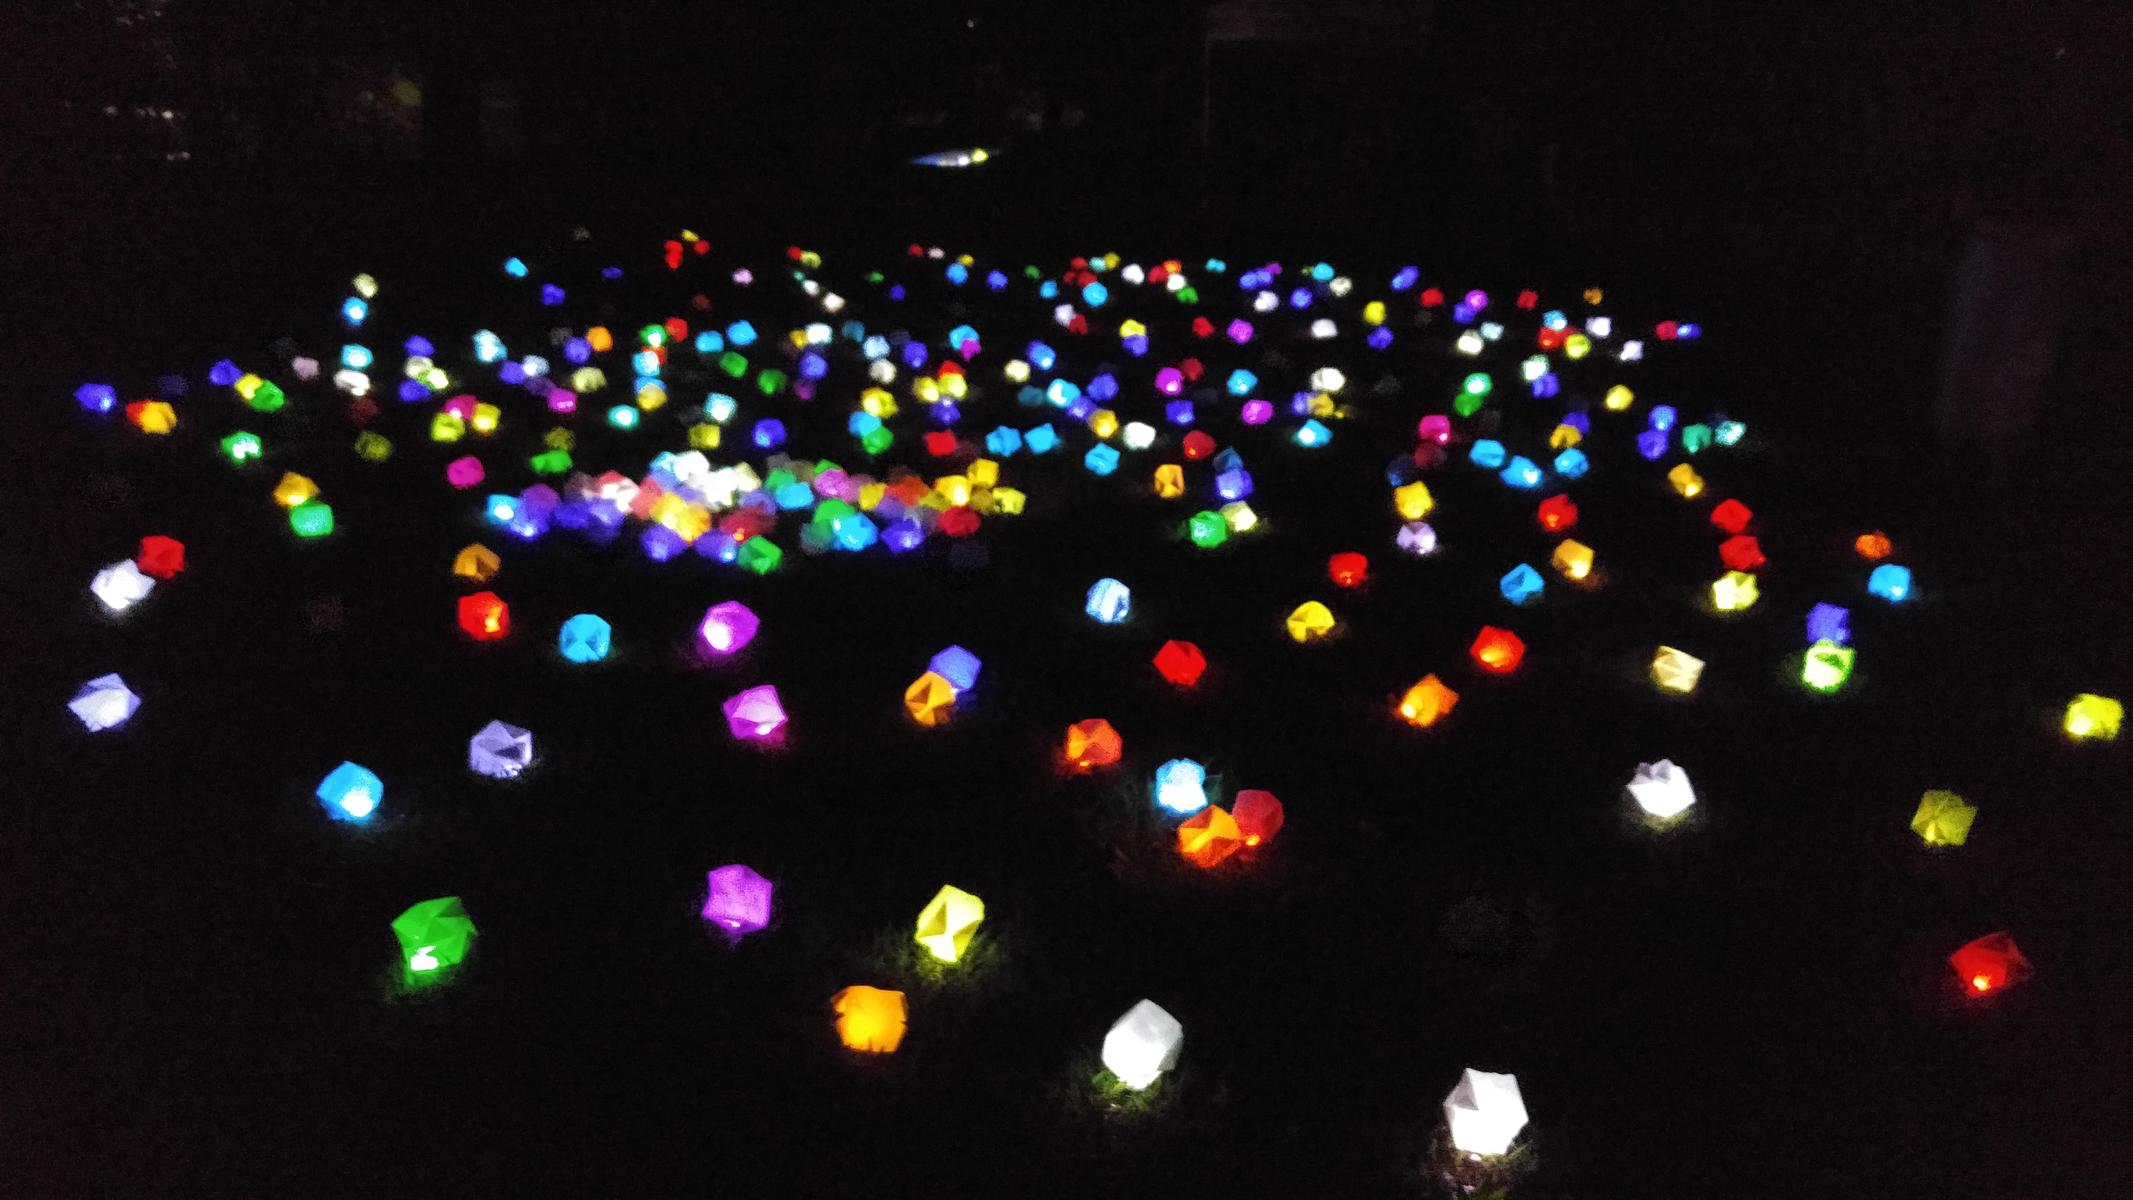 A constellation of hundreds of origami balls glow in many colors at night in a grassy area of Grant Park.